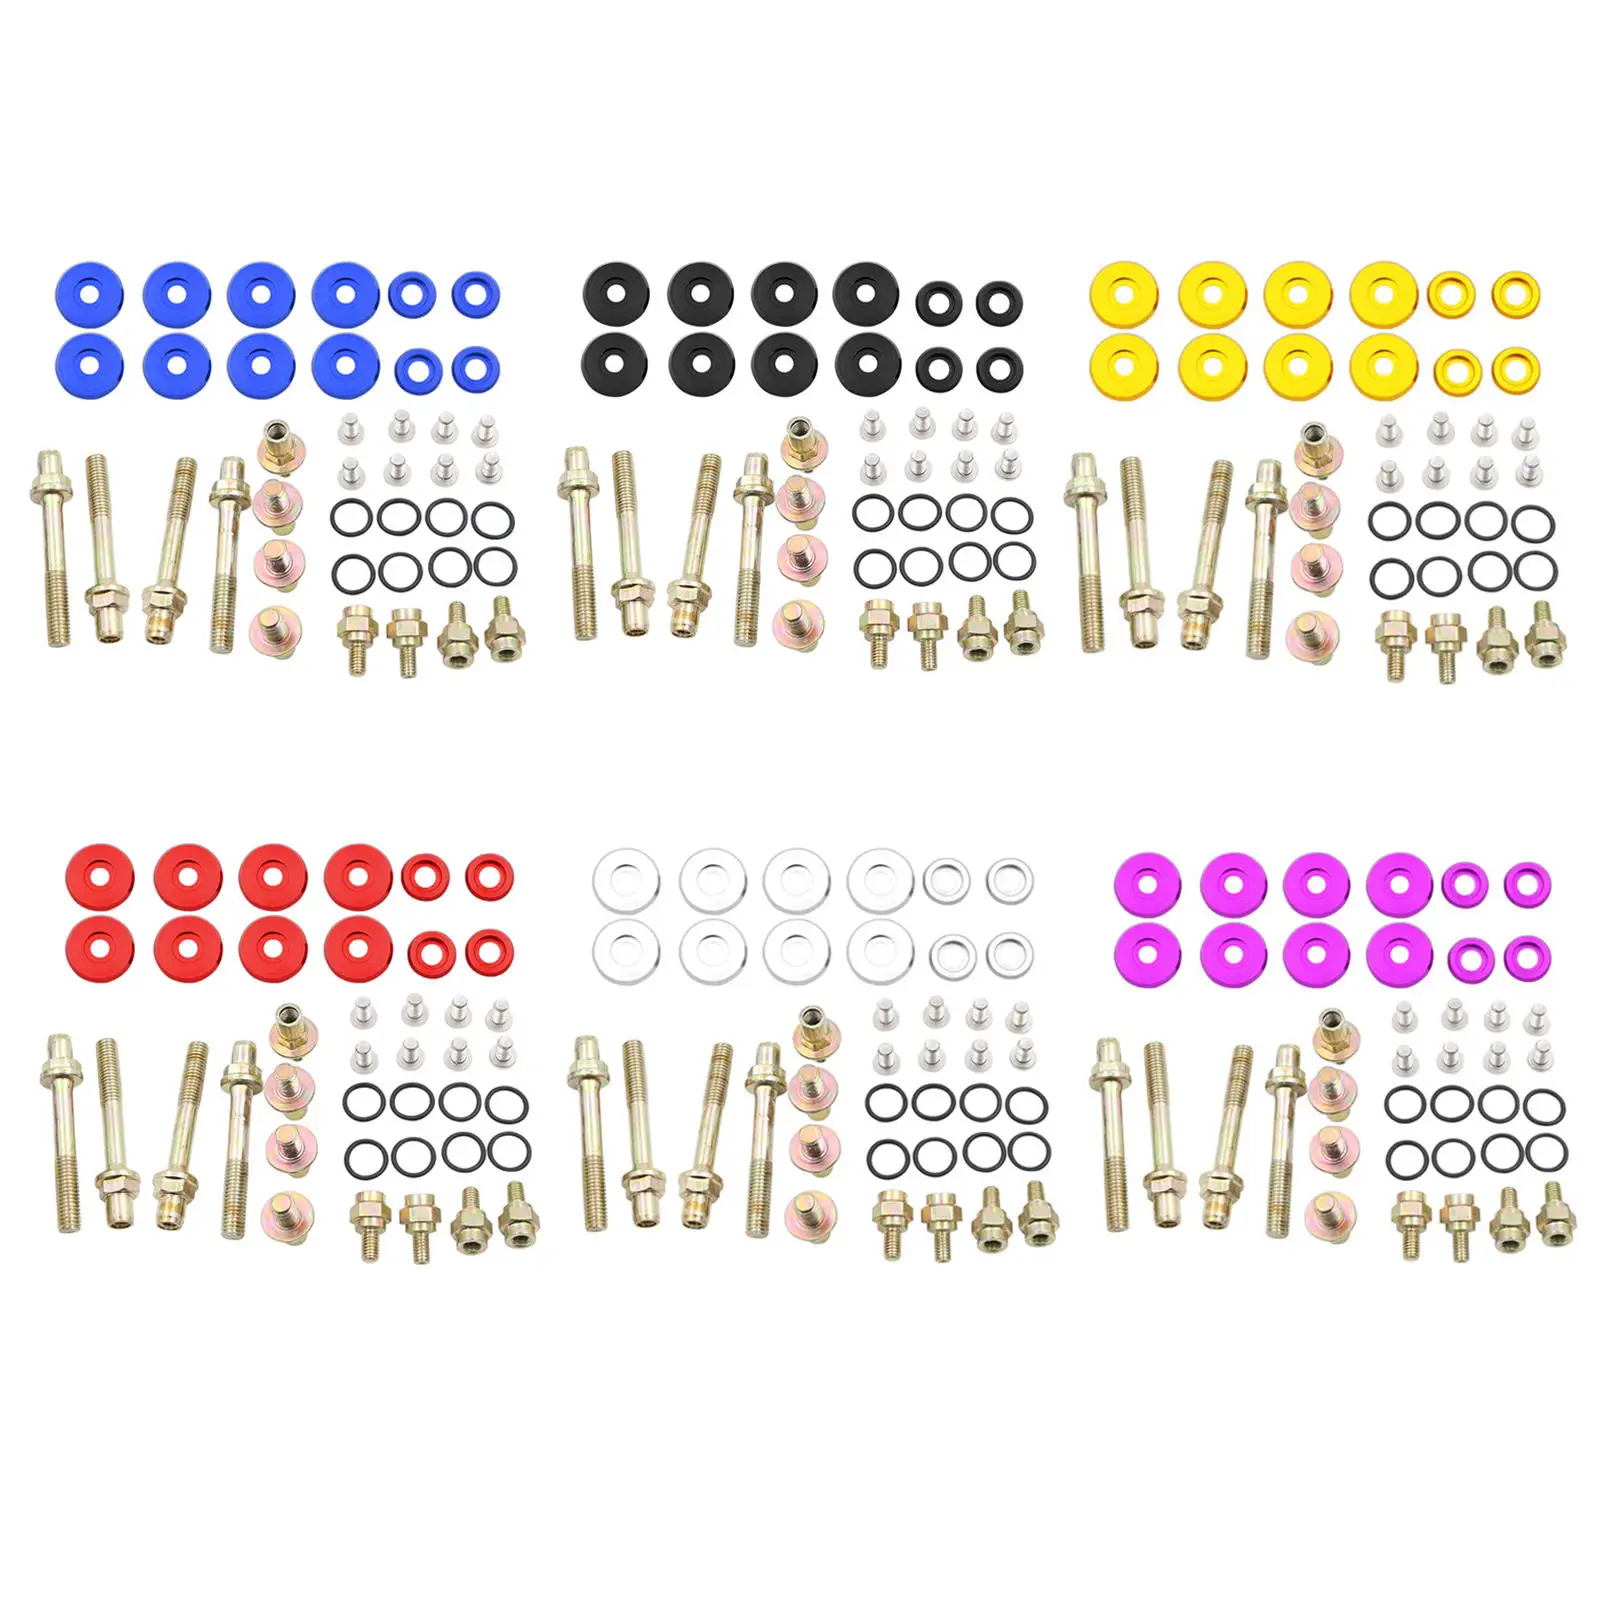 Engine Valve Cover Washer Bolt Kit for Honda B16A2 B16A3 B17A1 Replaces Easy to Install